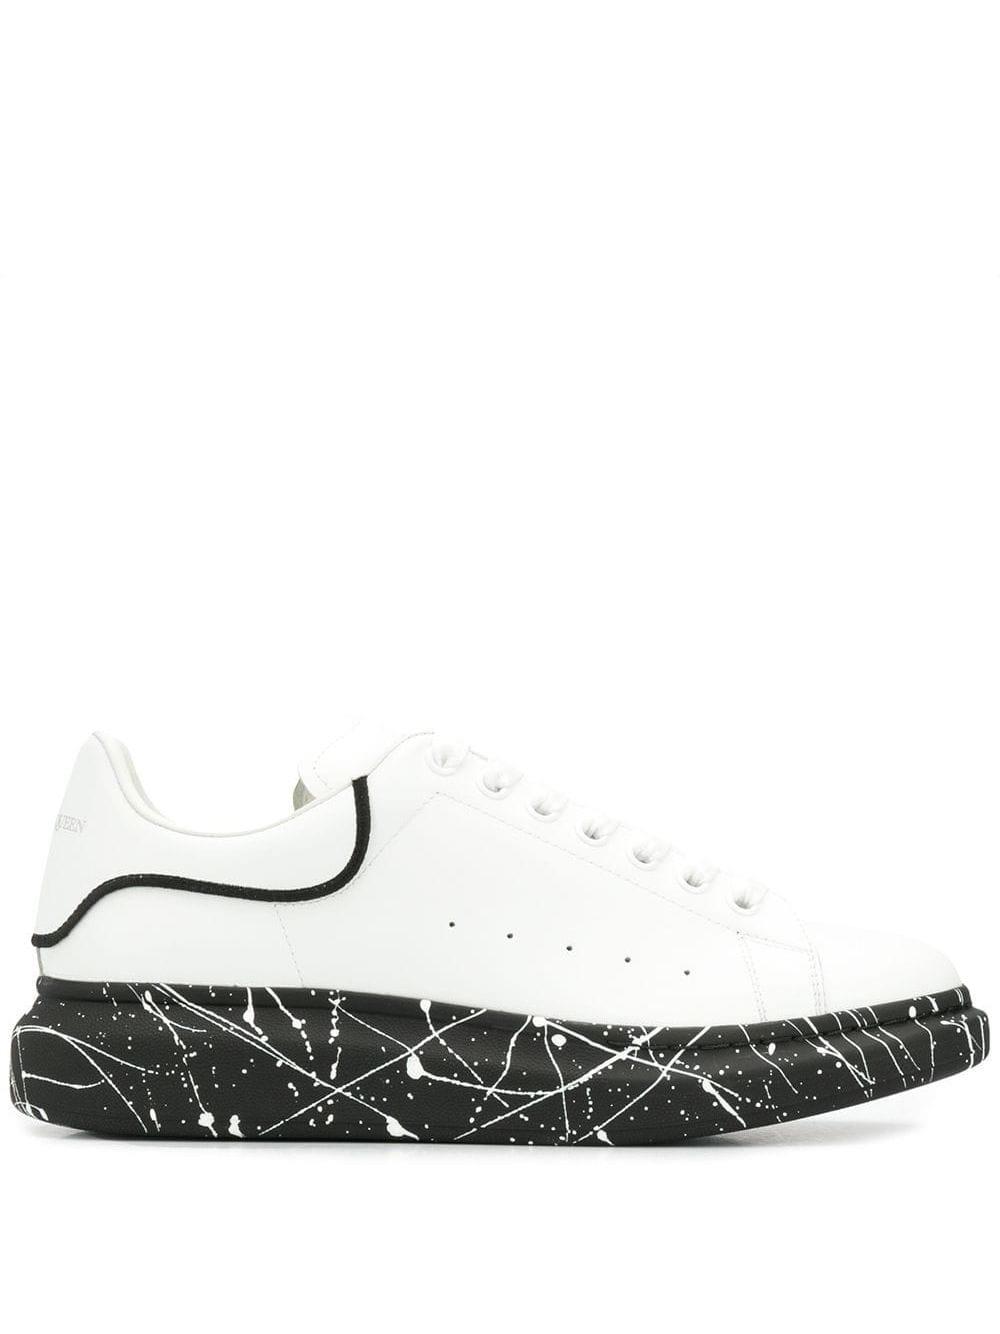 Alexander McQueen Painted Sole Lace-up Sneakers in White for Men | Lyst